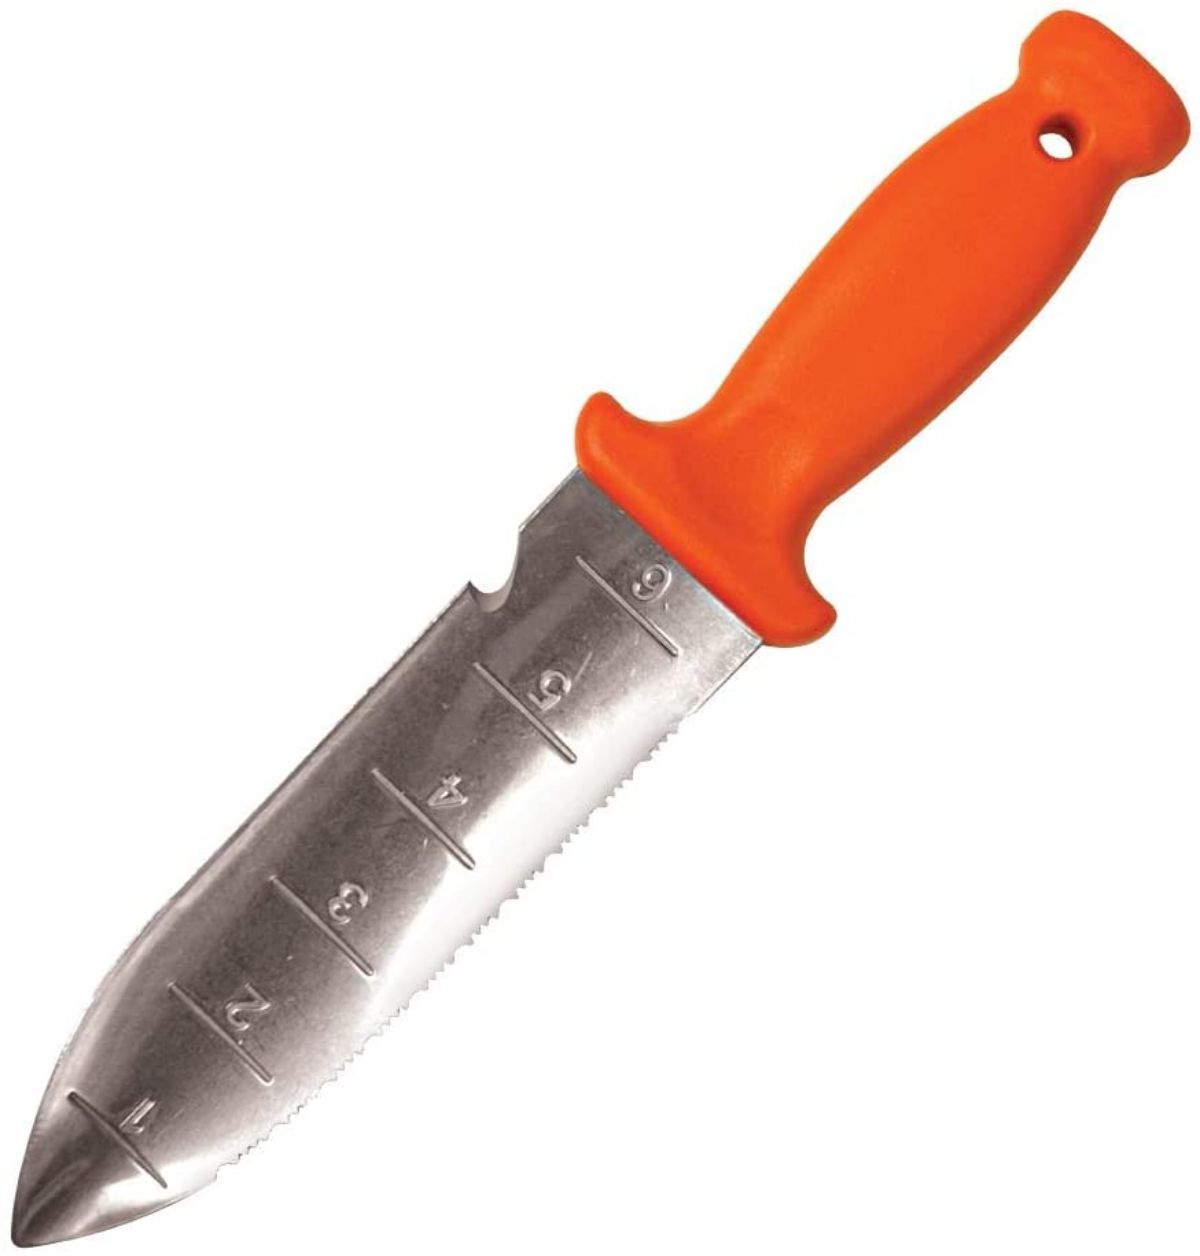 A Hori-Hori garden knife with numbered measurements and an orange handle, recommended garden tool